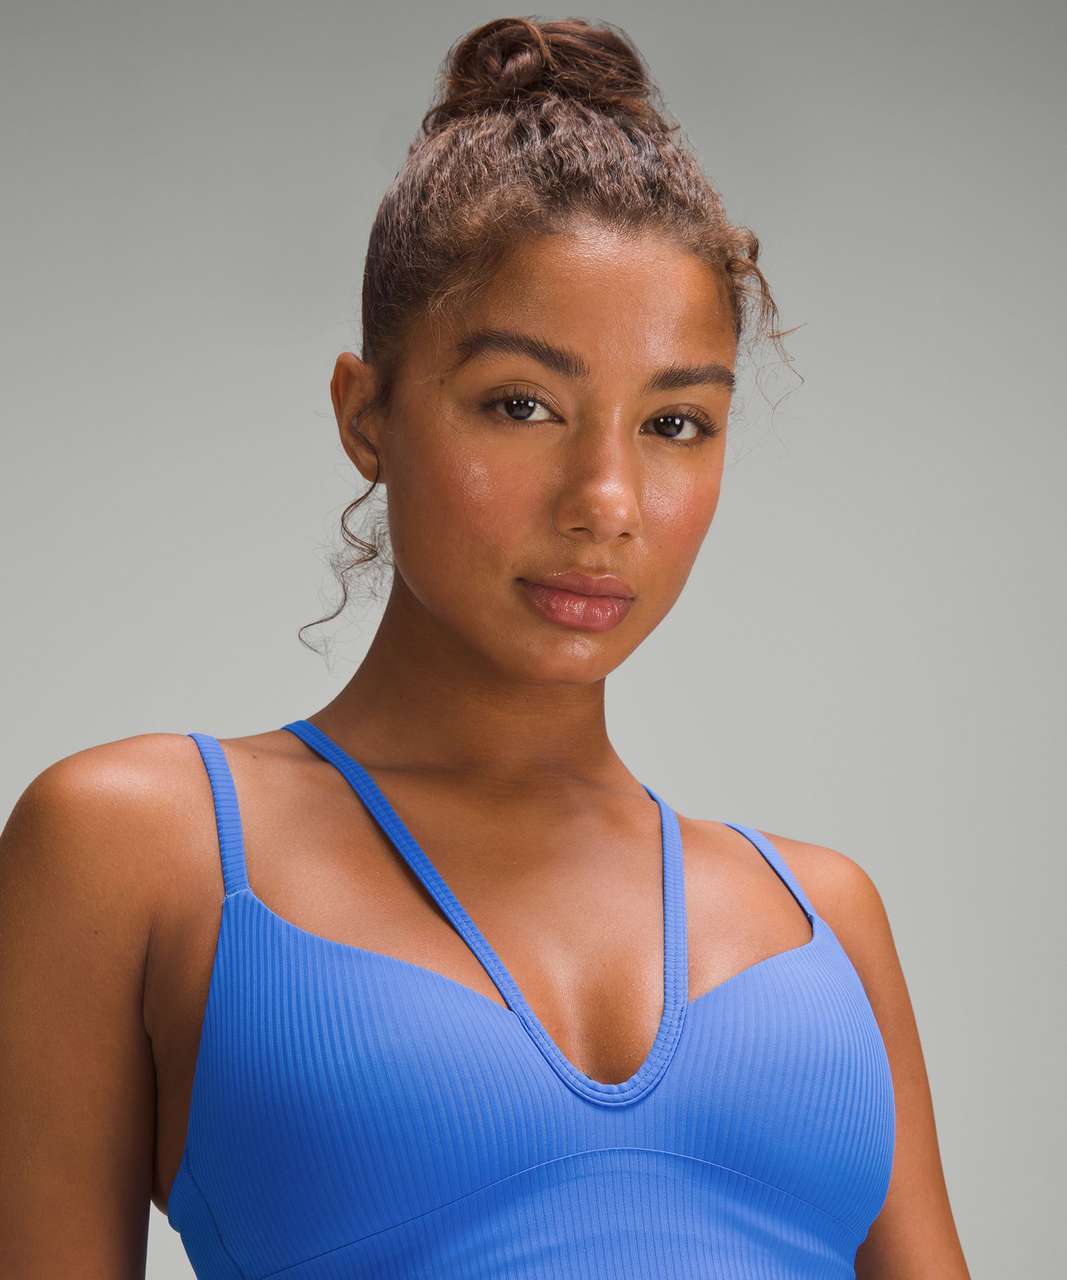 Lululemon Like a Cloud Strappy Longline Ribbed Bra *Light Support, B/C Cup - Pipe Dream Blue